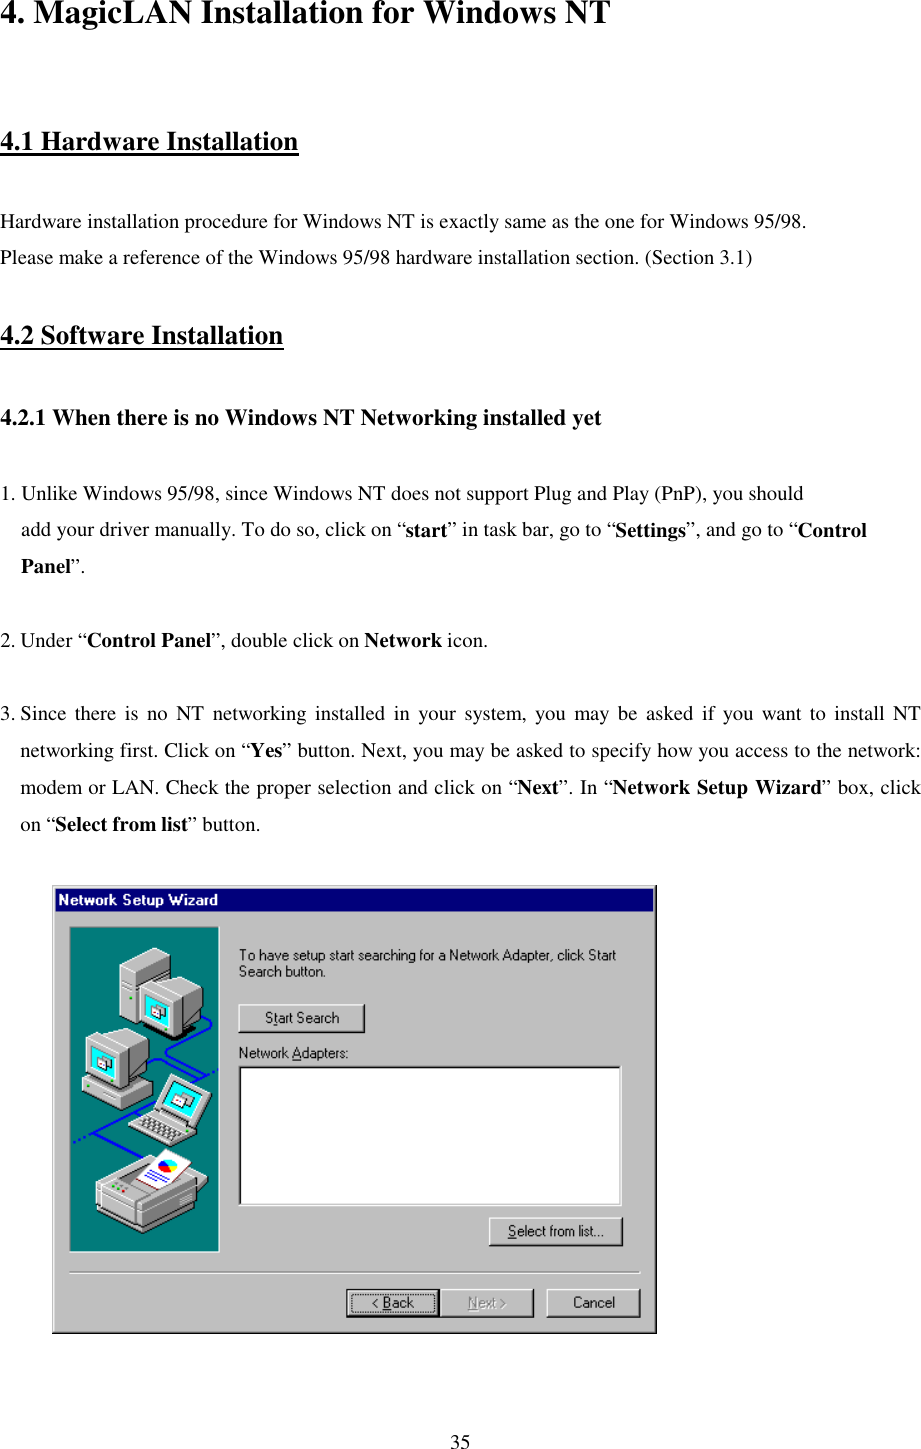   35 4. MagicLAN Installation for Windows NT   4.1 Hardware Installation  Hardware installation procedure for Windows NT is exactly same as the one for Windows 95/98. Please make a reference of the Windows 95/98 hardware installation section. (Section 3.1)  4.2 Software Installation  4.2.1 When there is no Windows NT Networking installed yet   1. Unlike Windows 95/98, since Windows NT does not support Plug and Play (PnP), you should     add your driver manually. To do so, click on “start” in task bar, go to “Settings”, and go to “Control     Panel”.  2. Under “Control Panel”, double click on Network icon.   3. Since there is no NT networking installed in your system, you may be asked if you want to install NT networking first. Click on “Yes” button. Next, you may be asked to specify how you access to the network: modem or LAN. Check the proper selection and click on “Next”. In “Network Setup Wizard” box, click on “Select from list” button.               